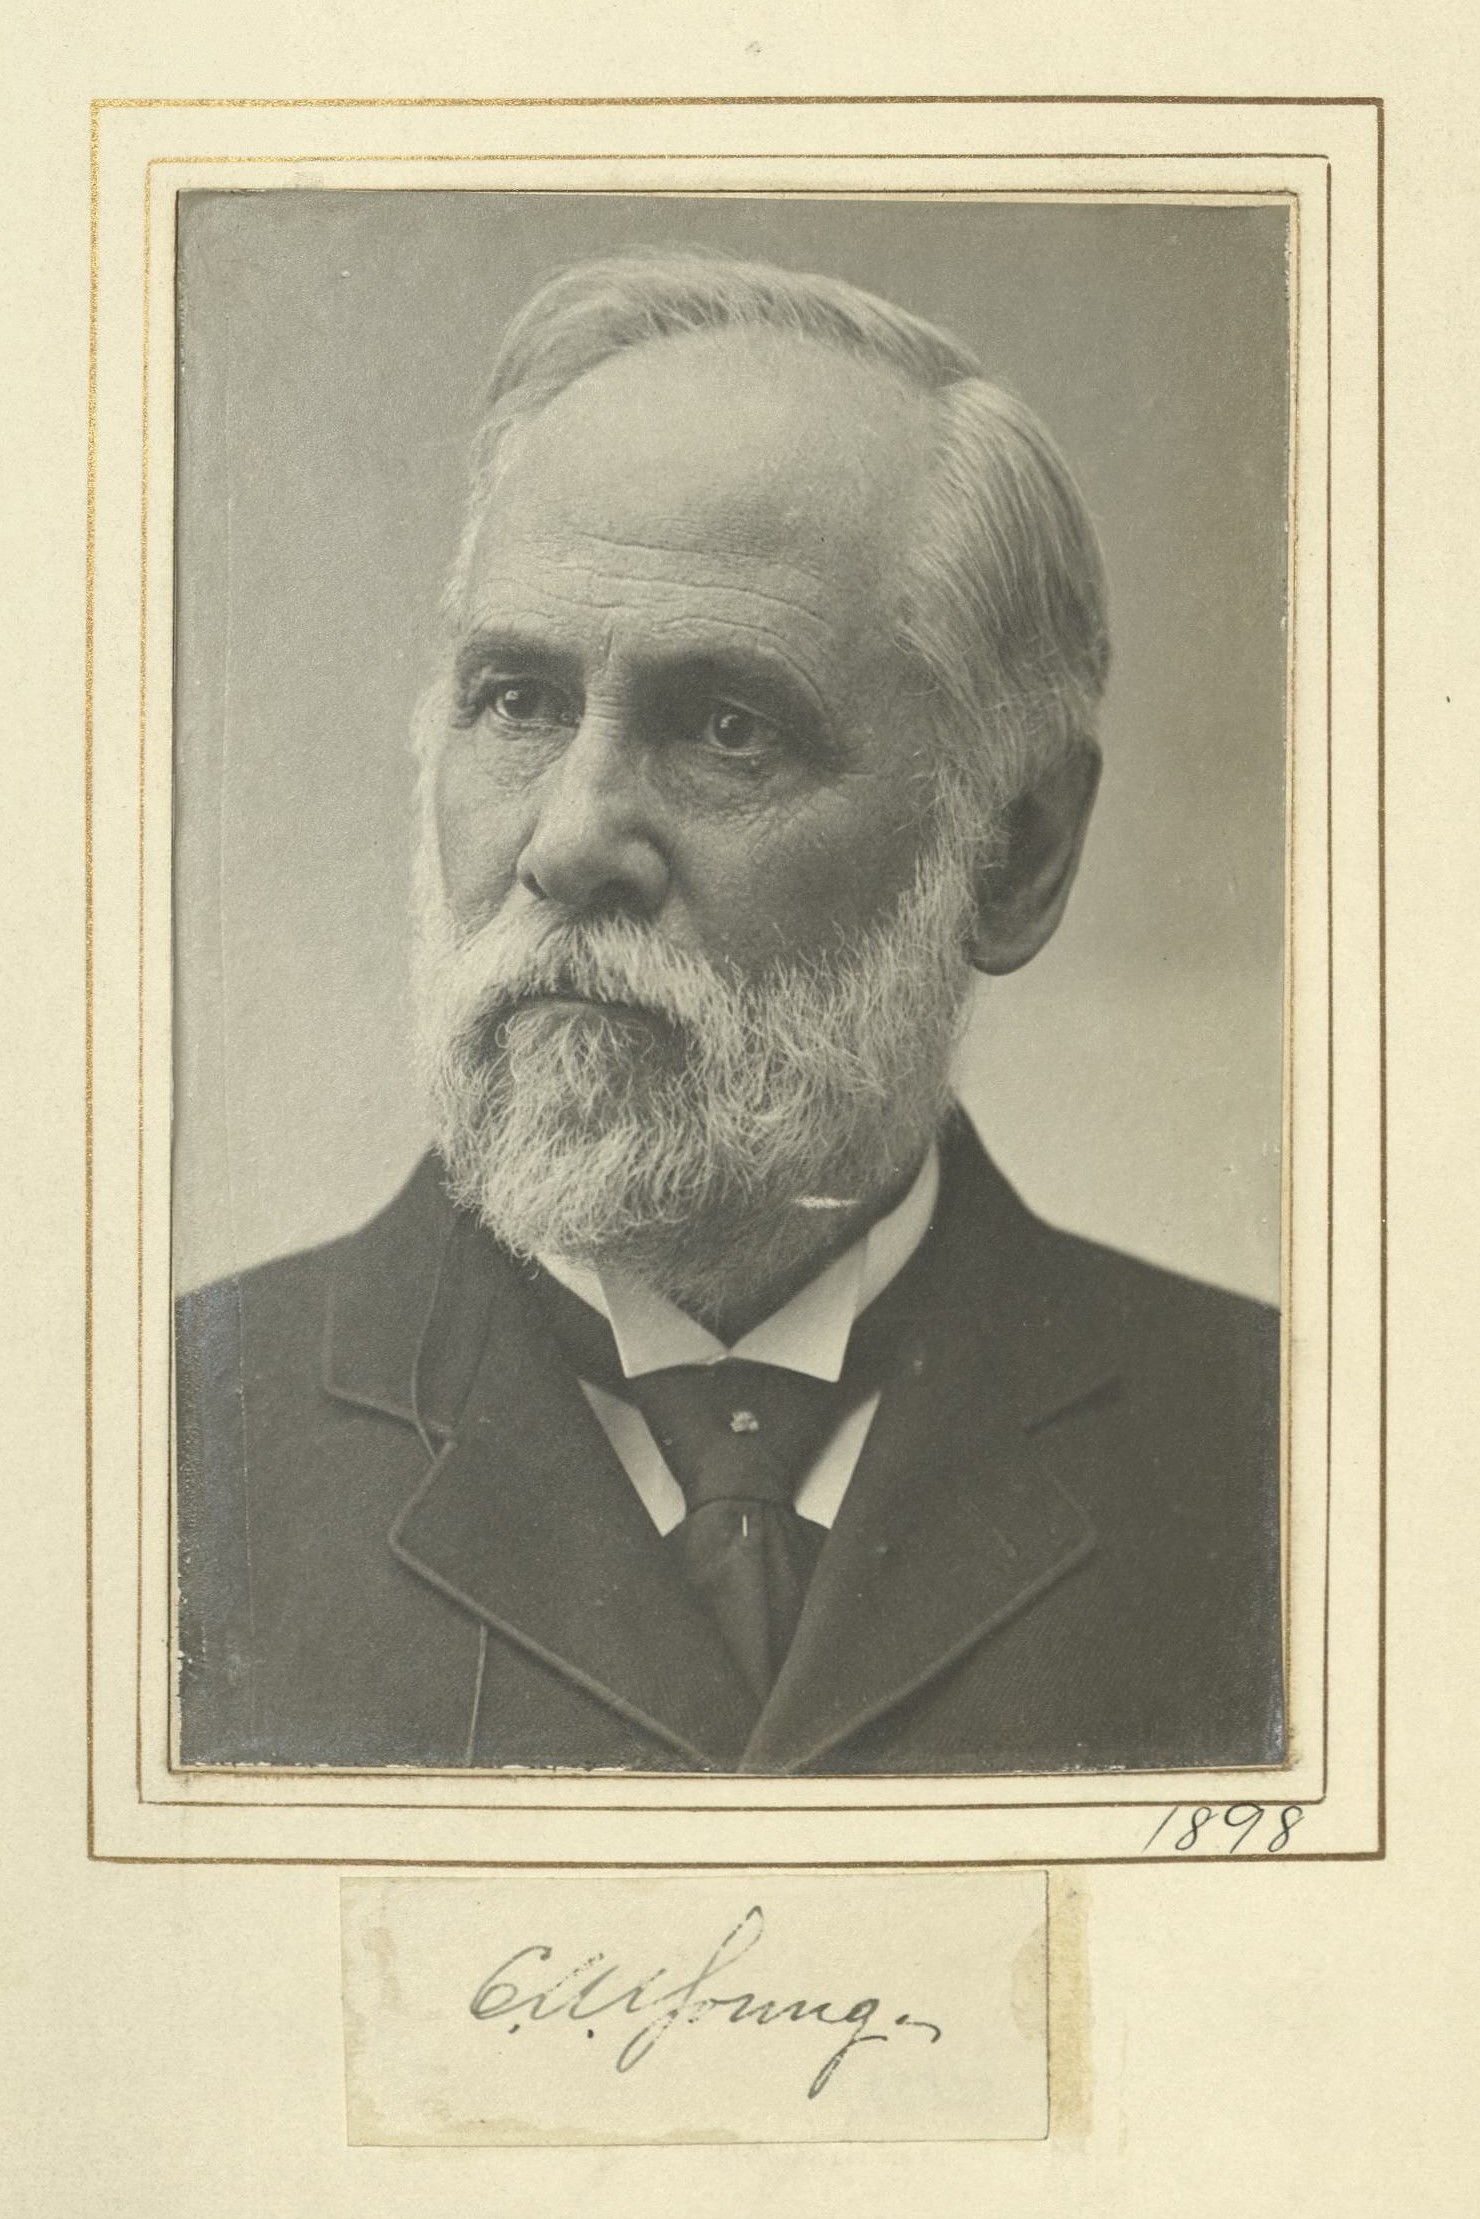 Member portrait of Charles A. Young